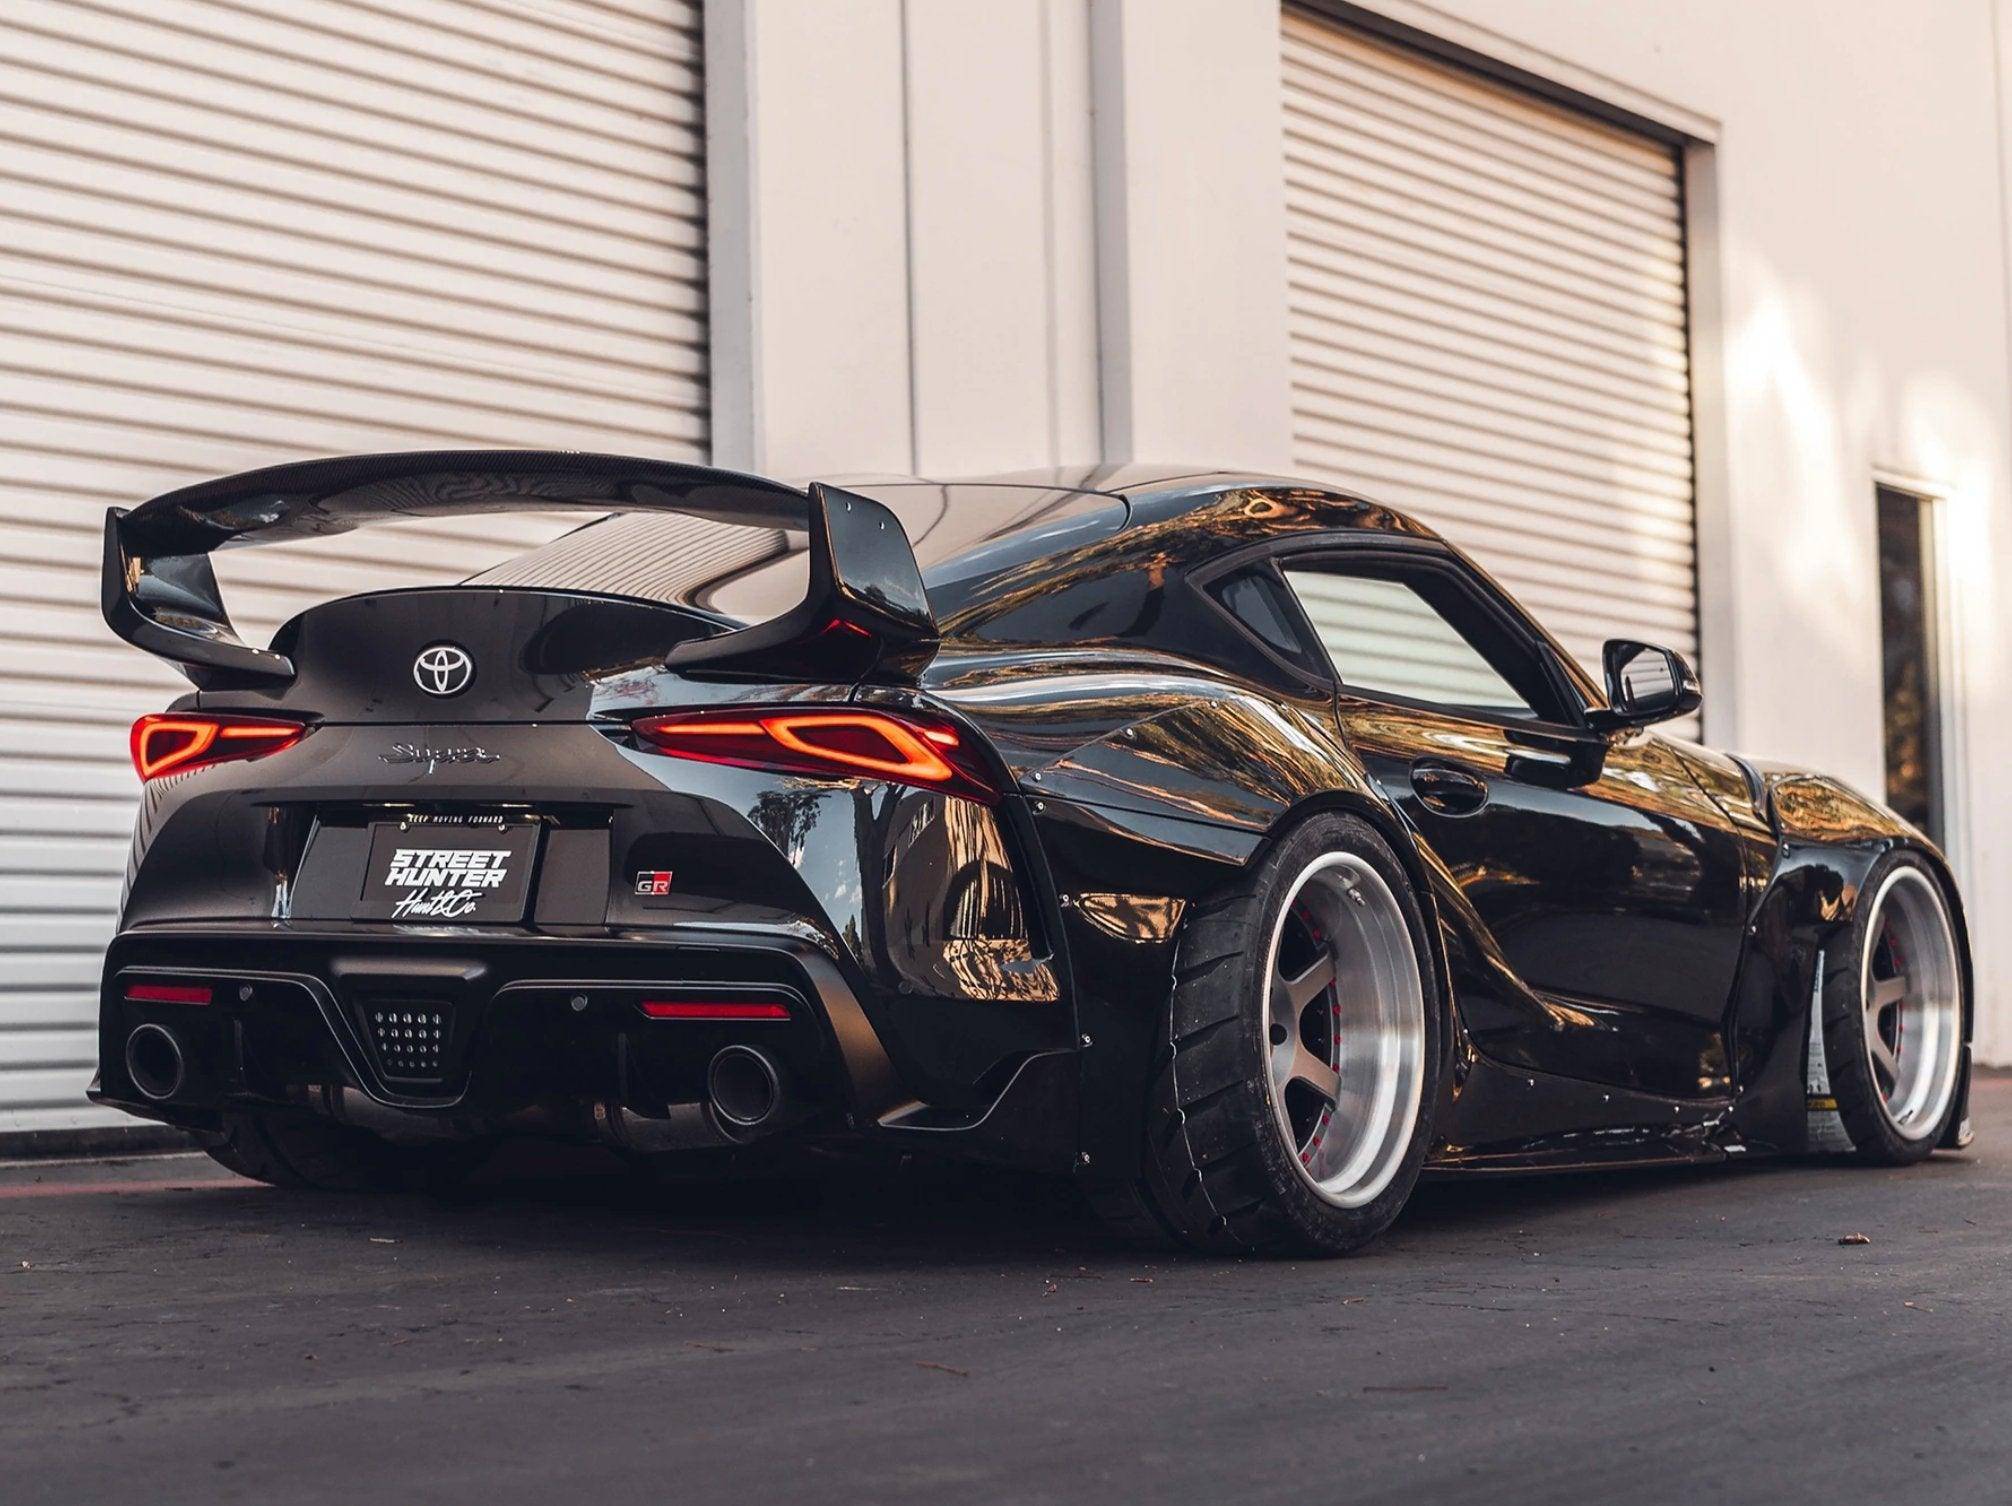 STREETHUNTER Full Wide Body Kit for Toyota Supra Mk5, Wide Body Kit, StreetHunter Designs - AUTOID | Premium Automotive Accessories